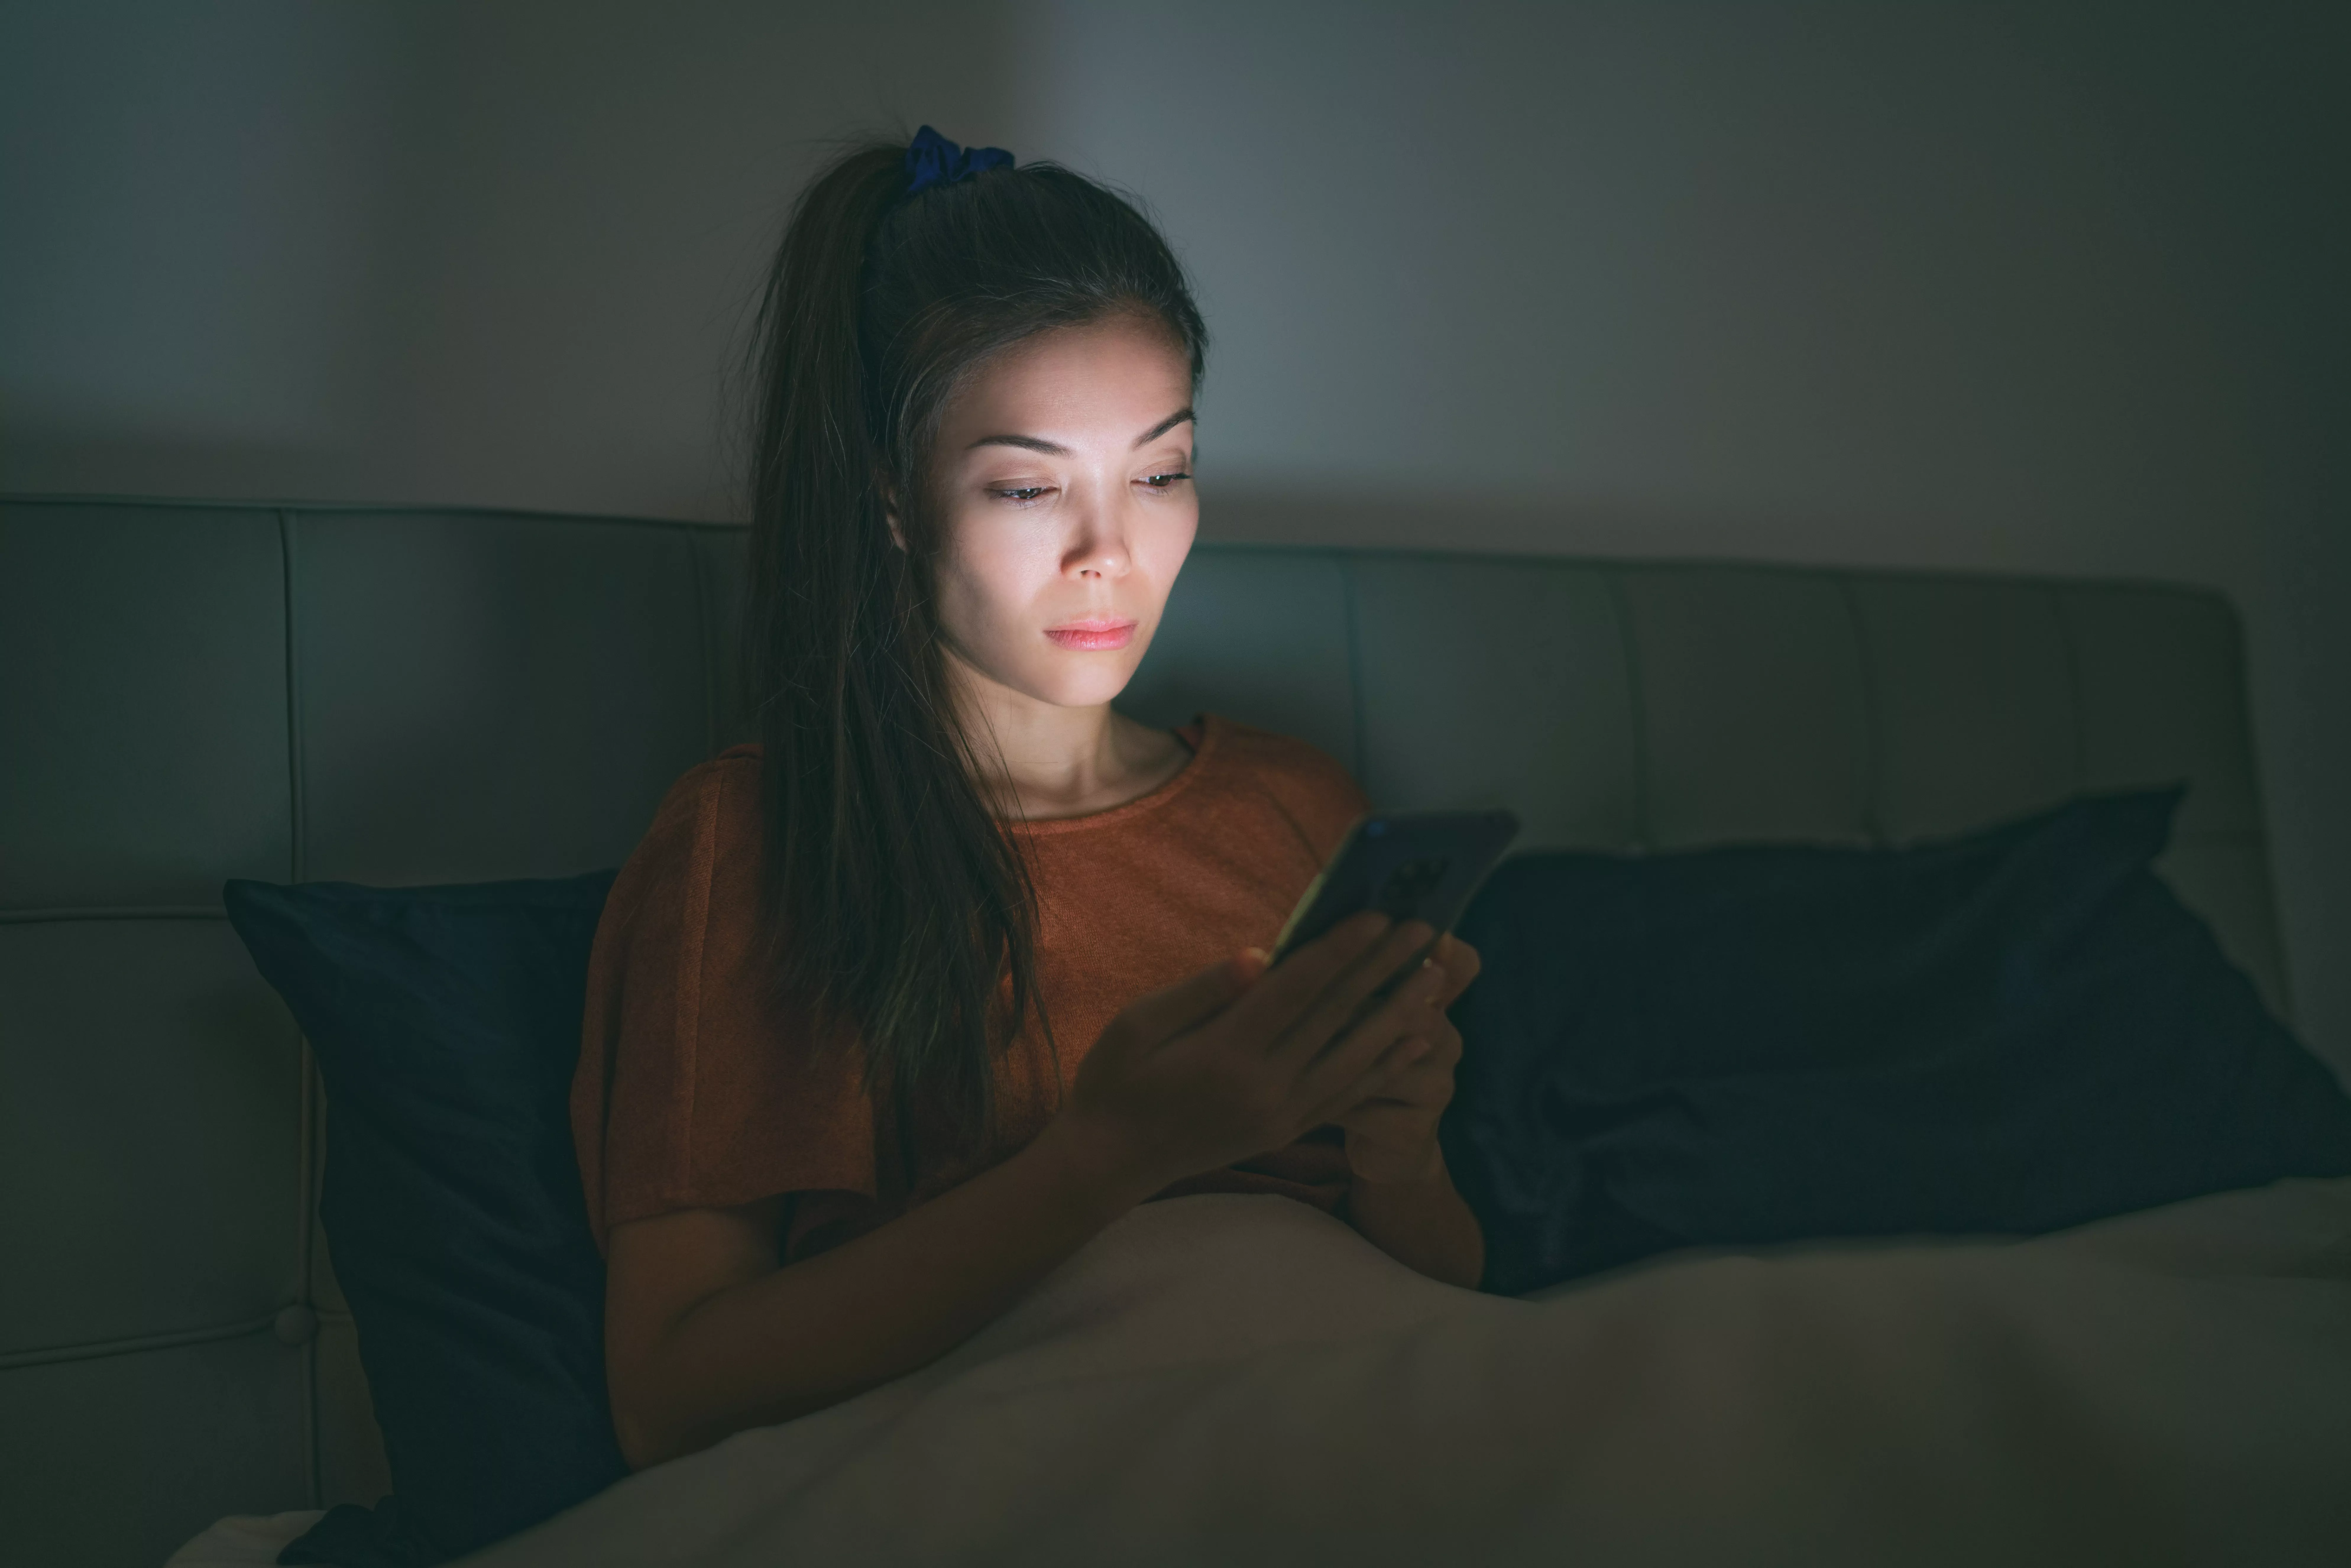 woman using cellphone in bed at night